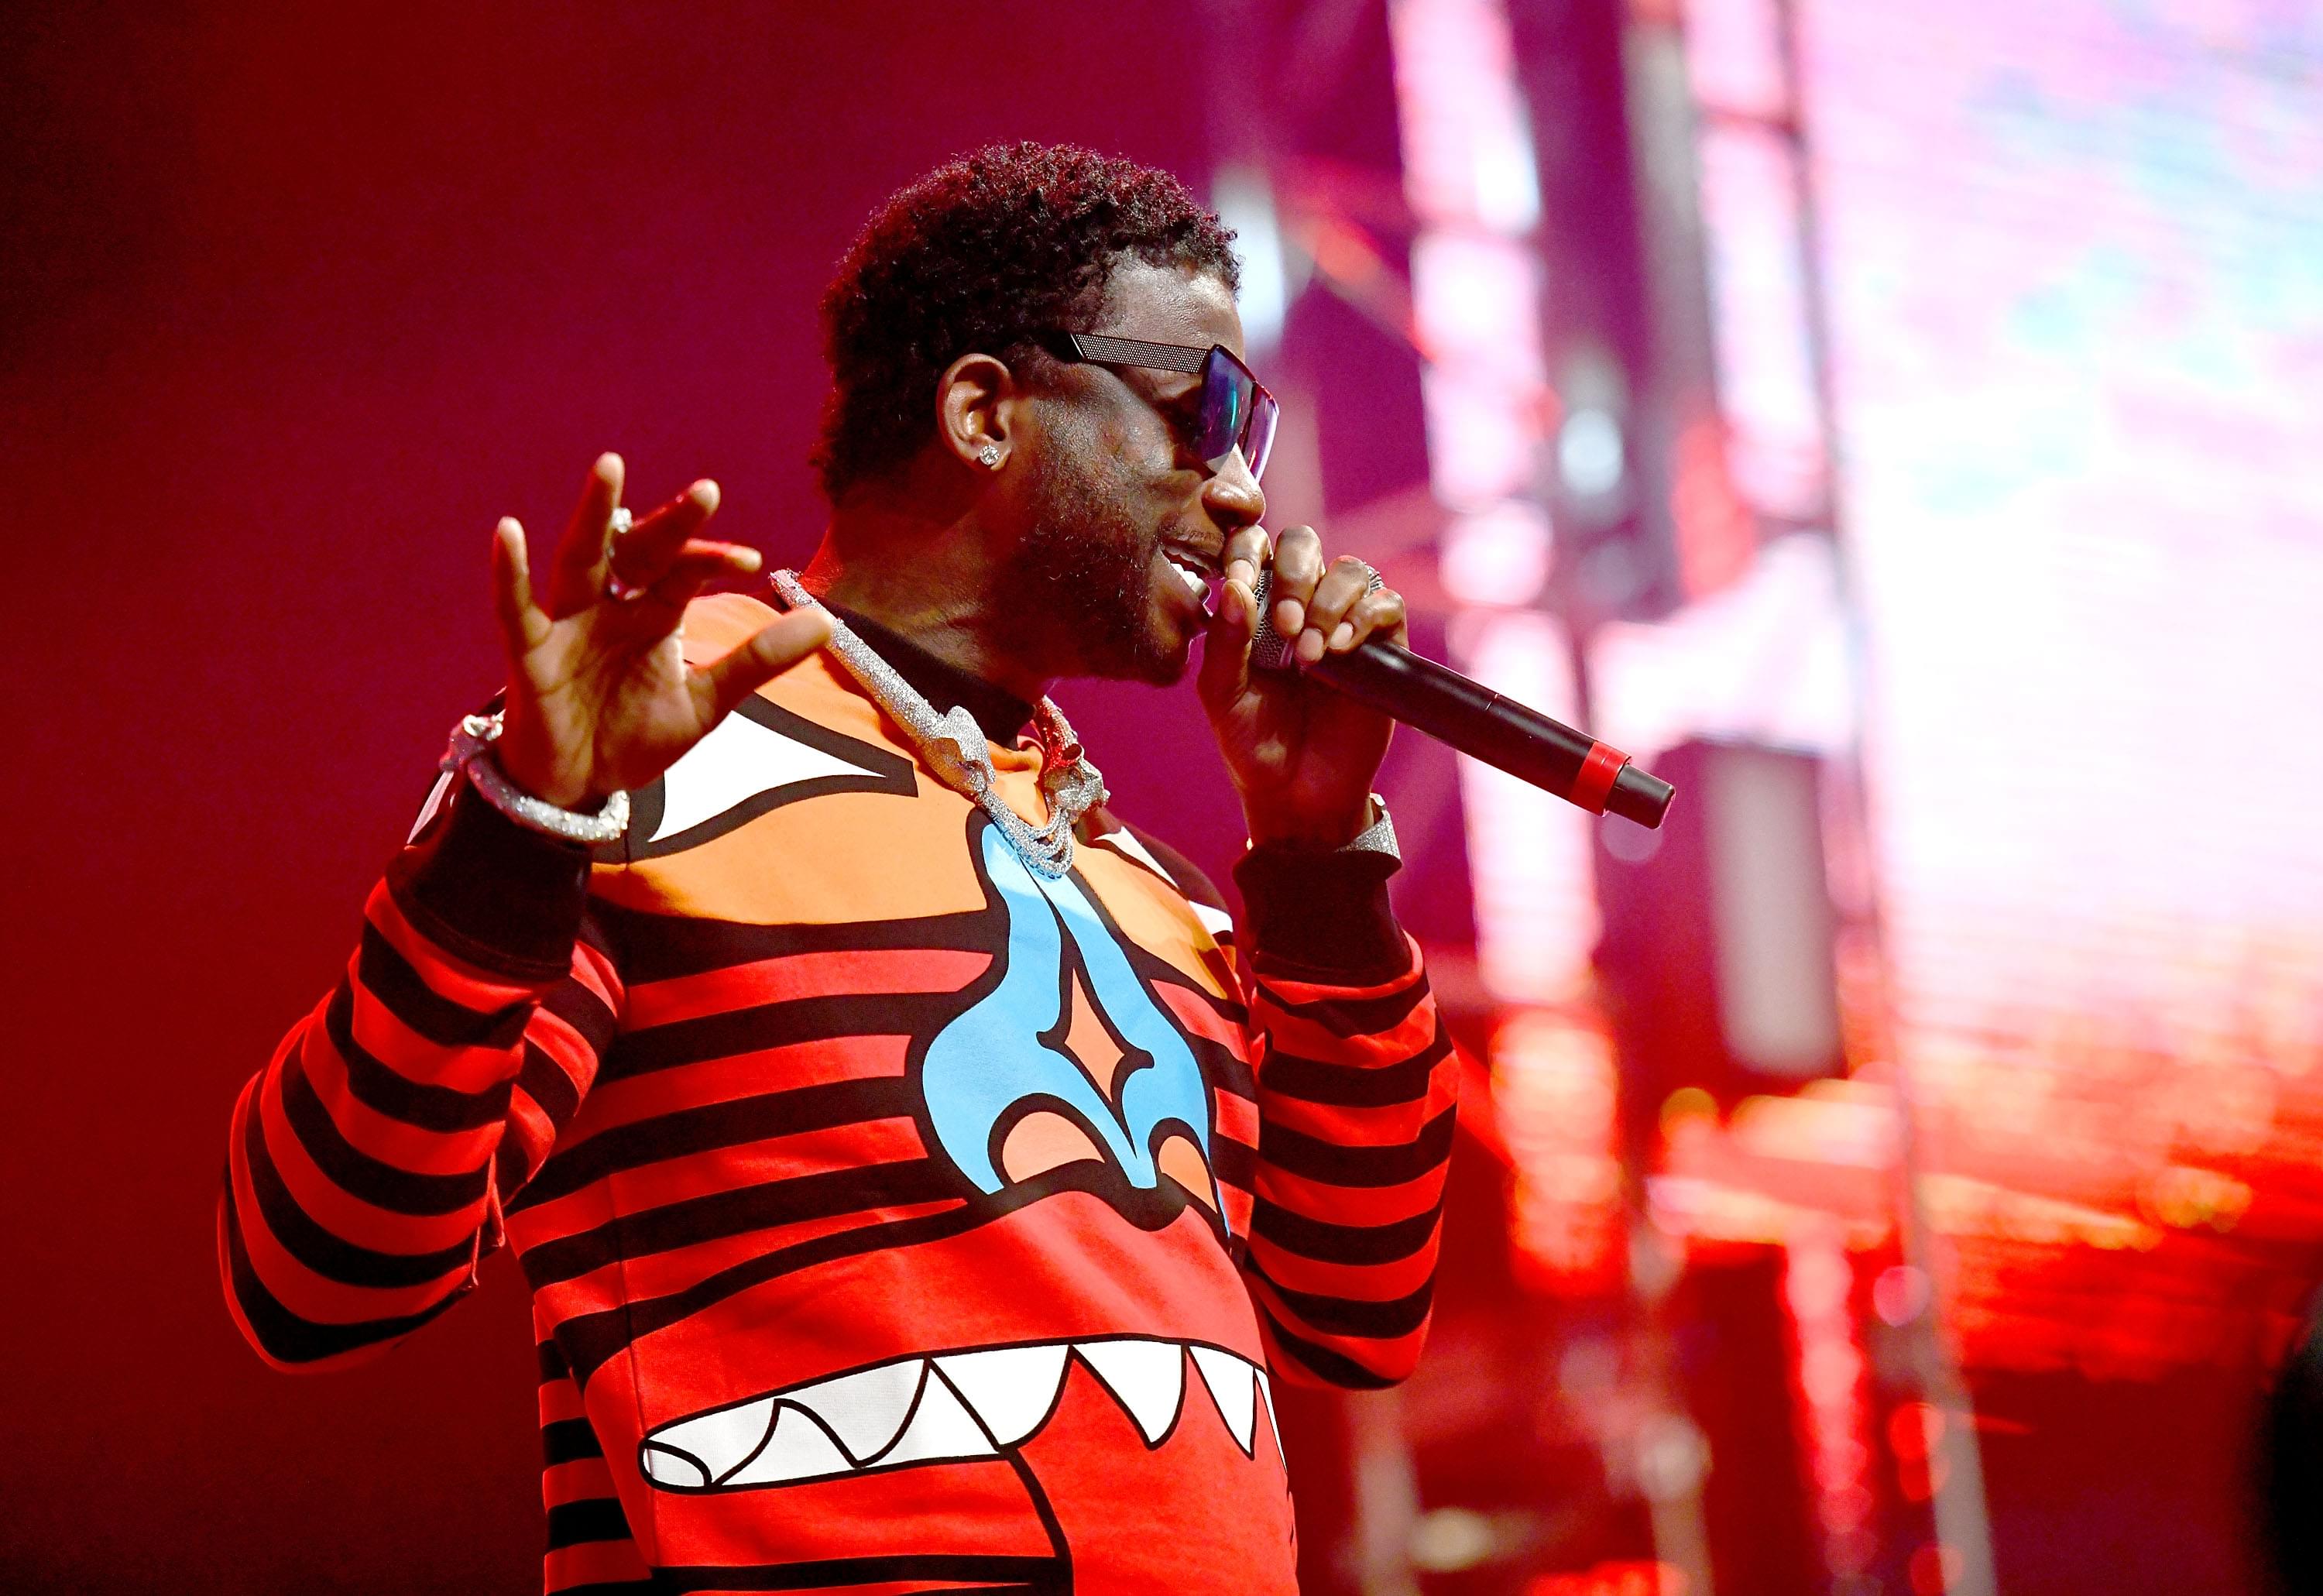 Gucci Mane Is Paying for His 20-Year High School Reunion